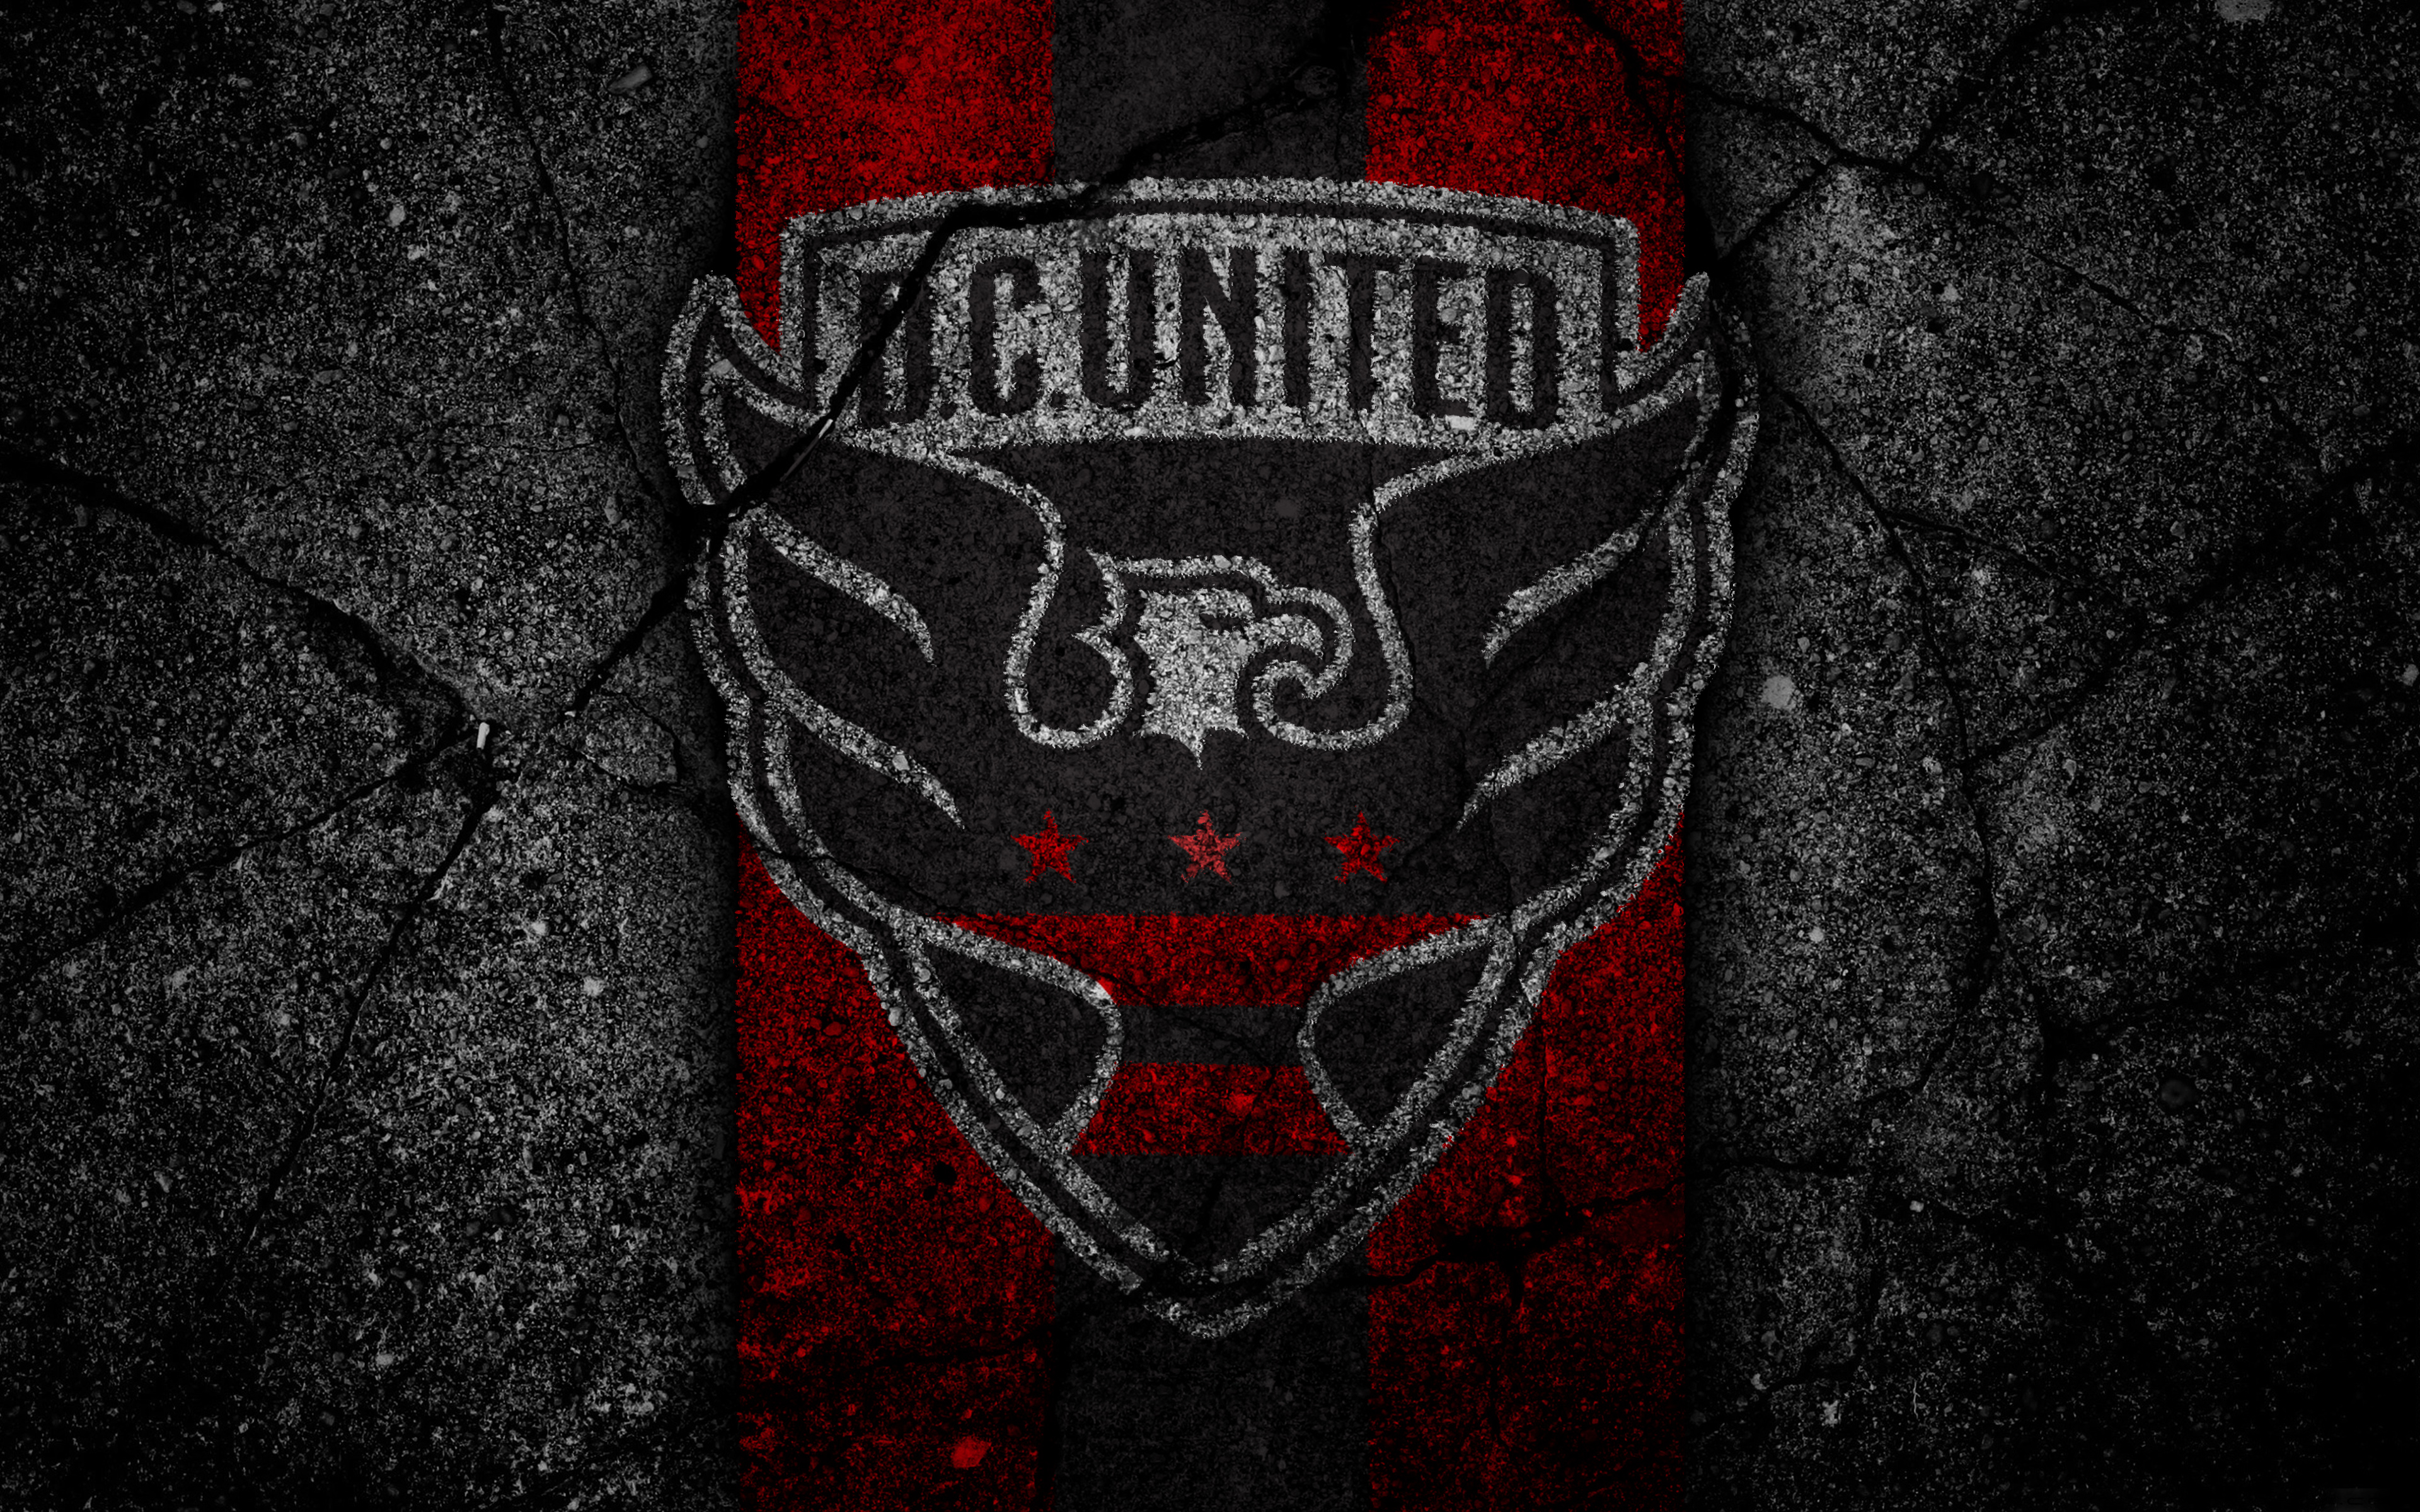 D.C. United Wallpapers